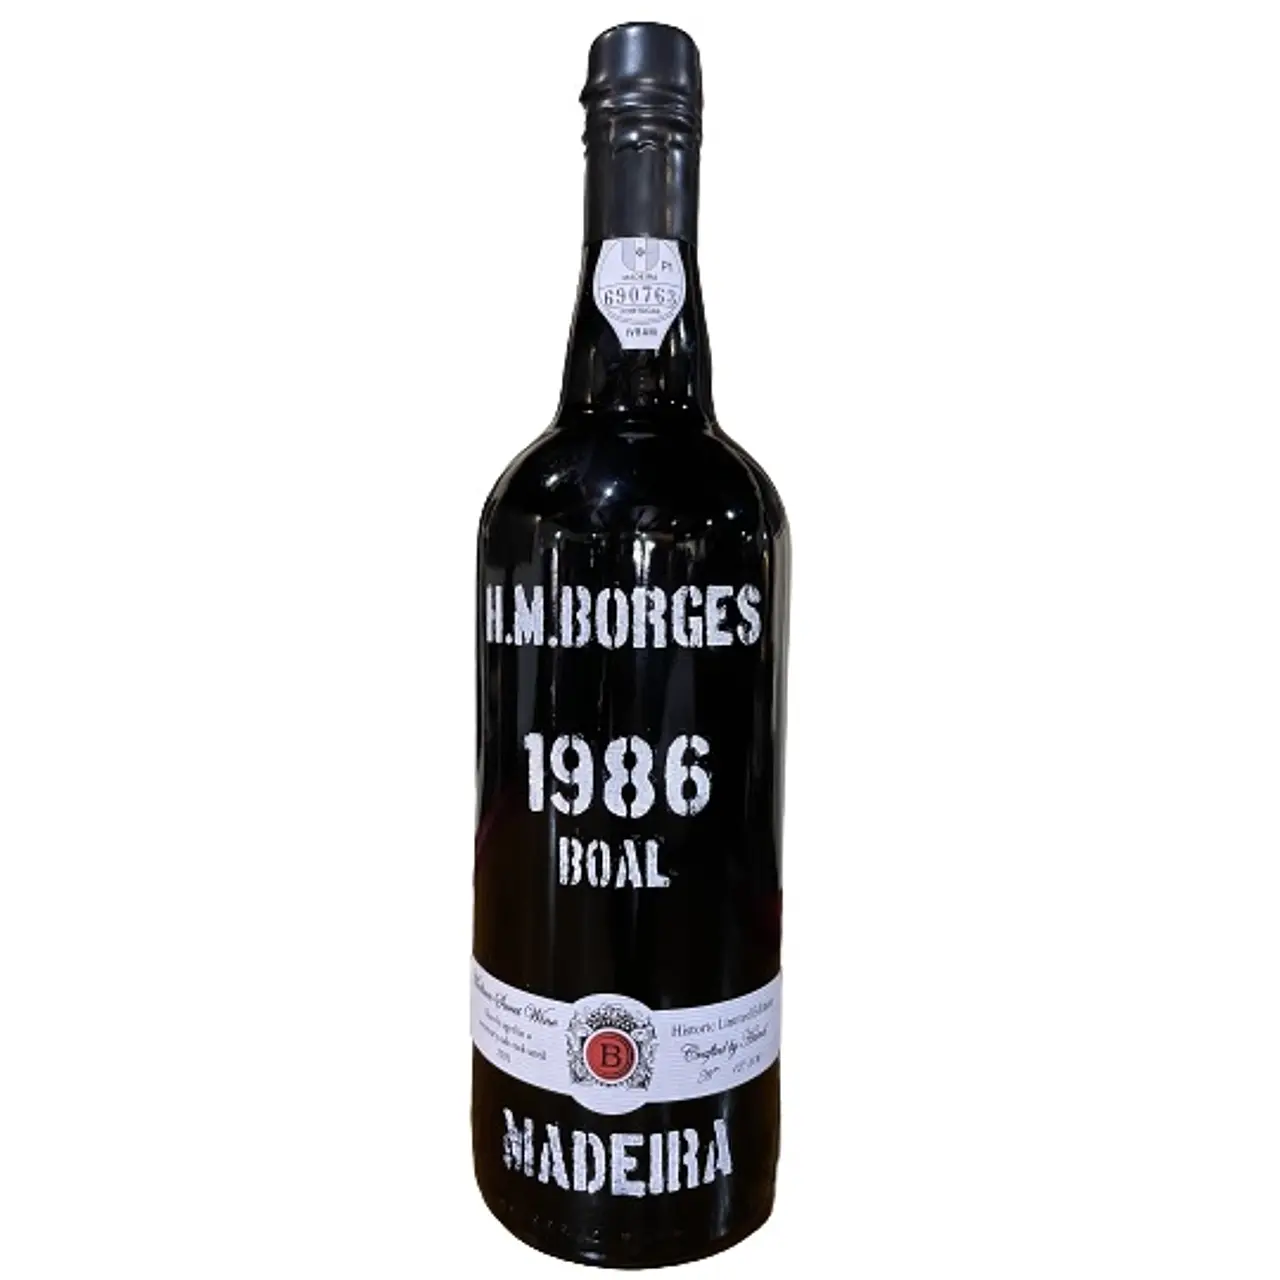 H M Borges Madeira Boal 1986